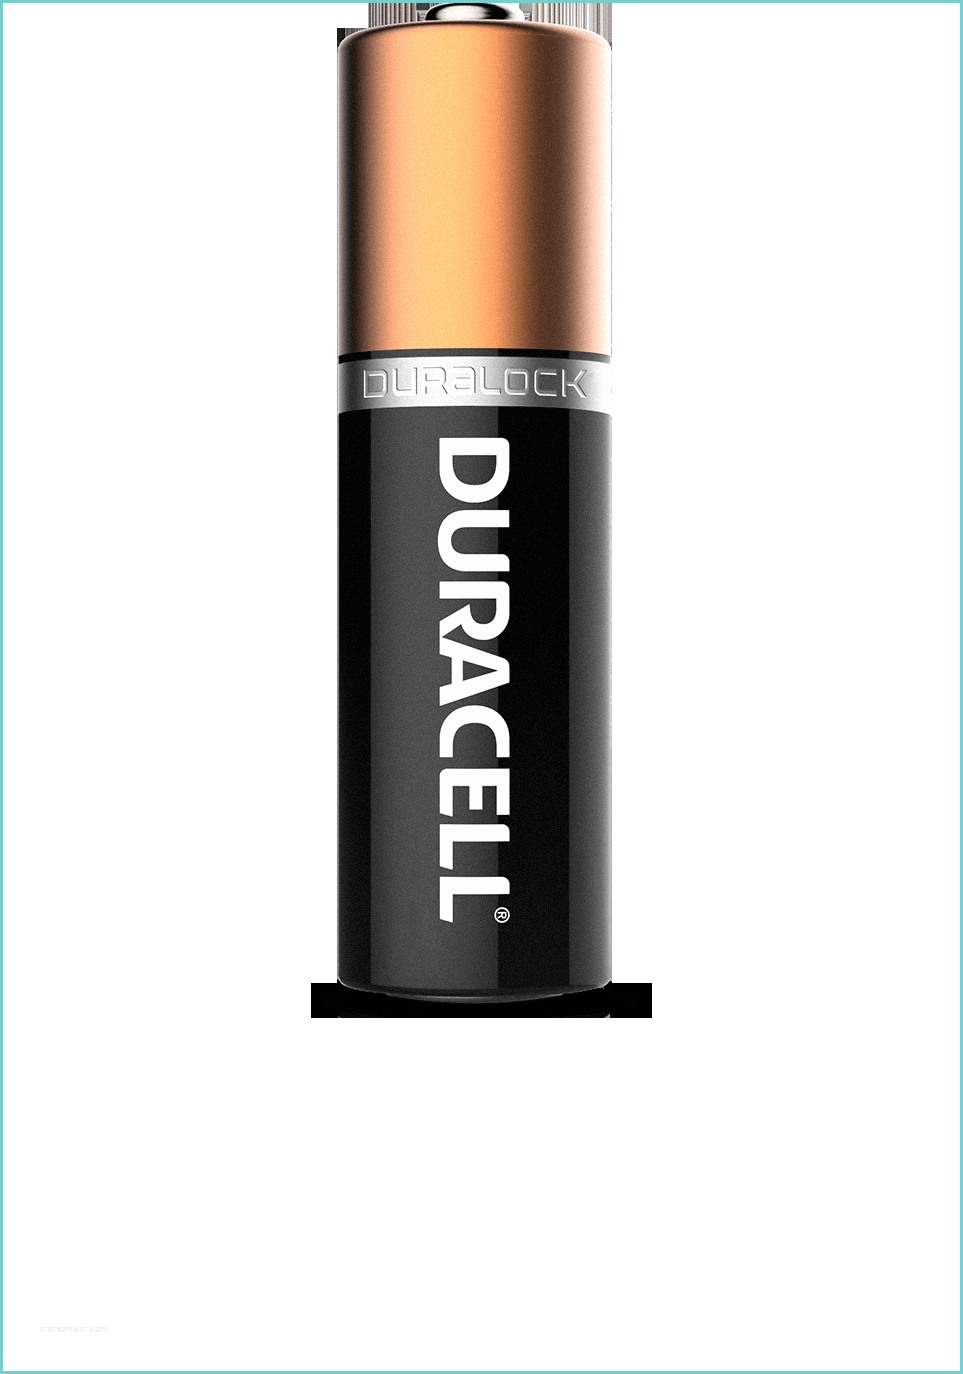 Duracell Alkaline Batteries Duracell Battery Products